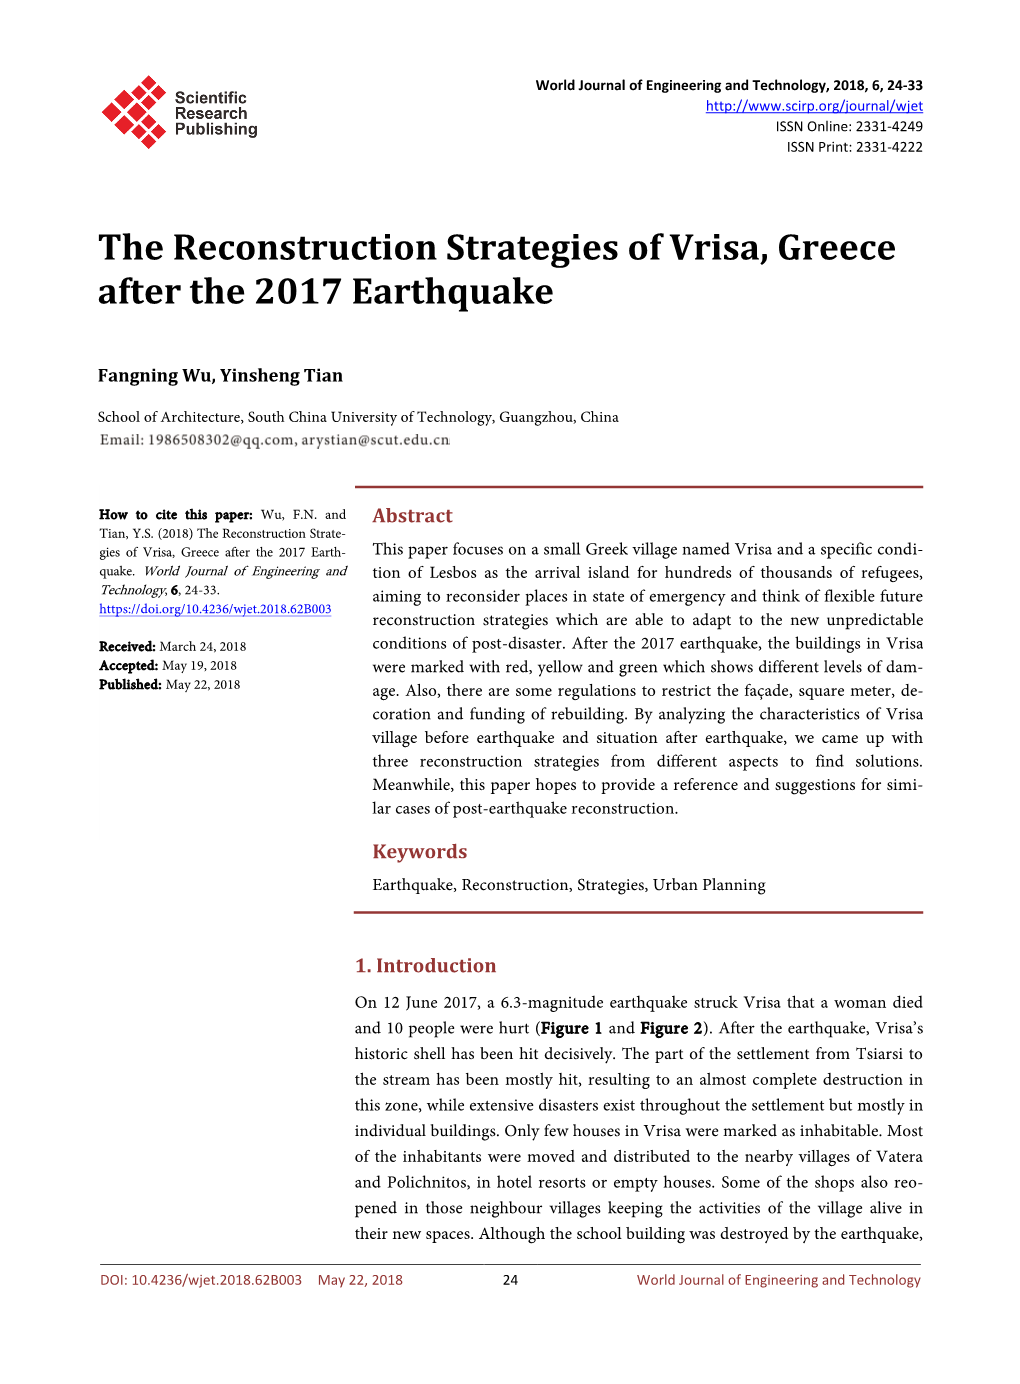 The Reconstruction Strategies of Vrisa, Greece After the 2017 Earthquake